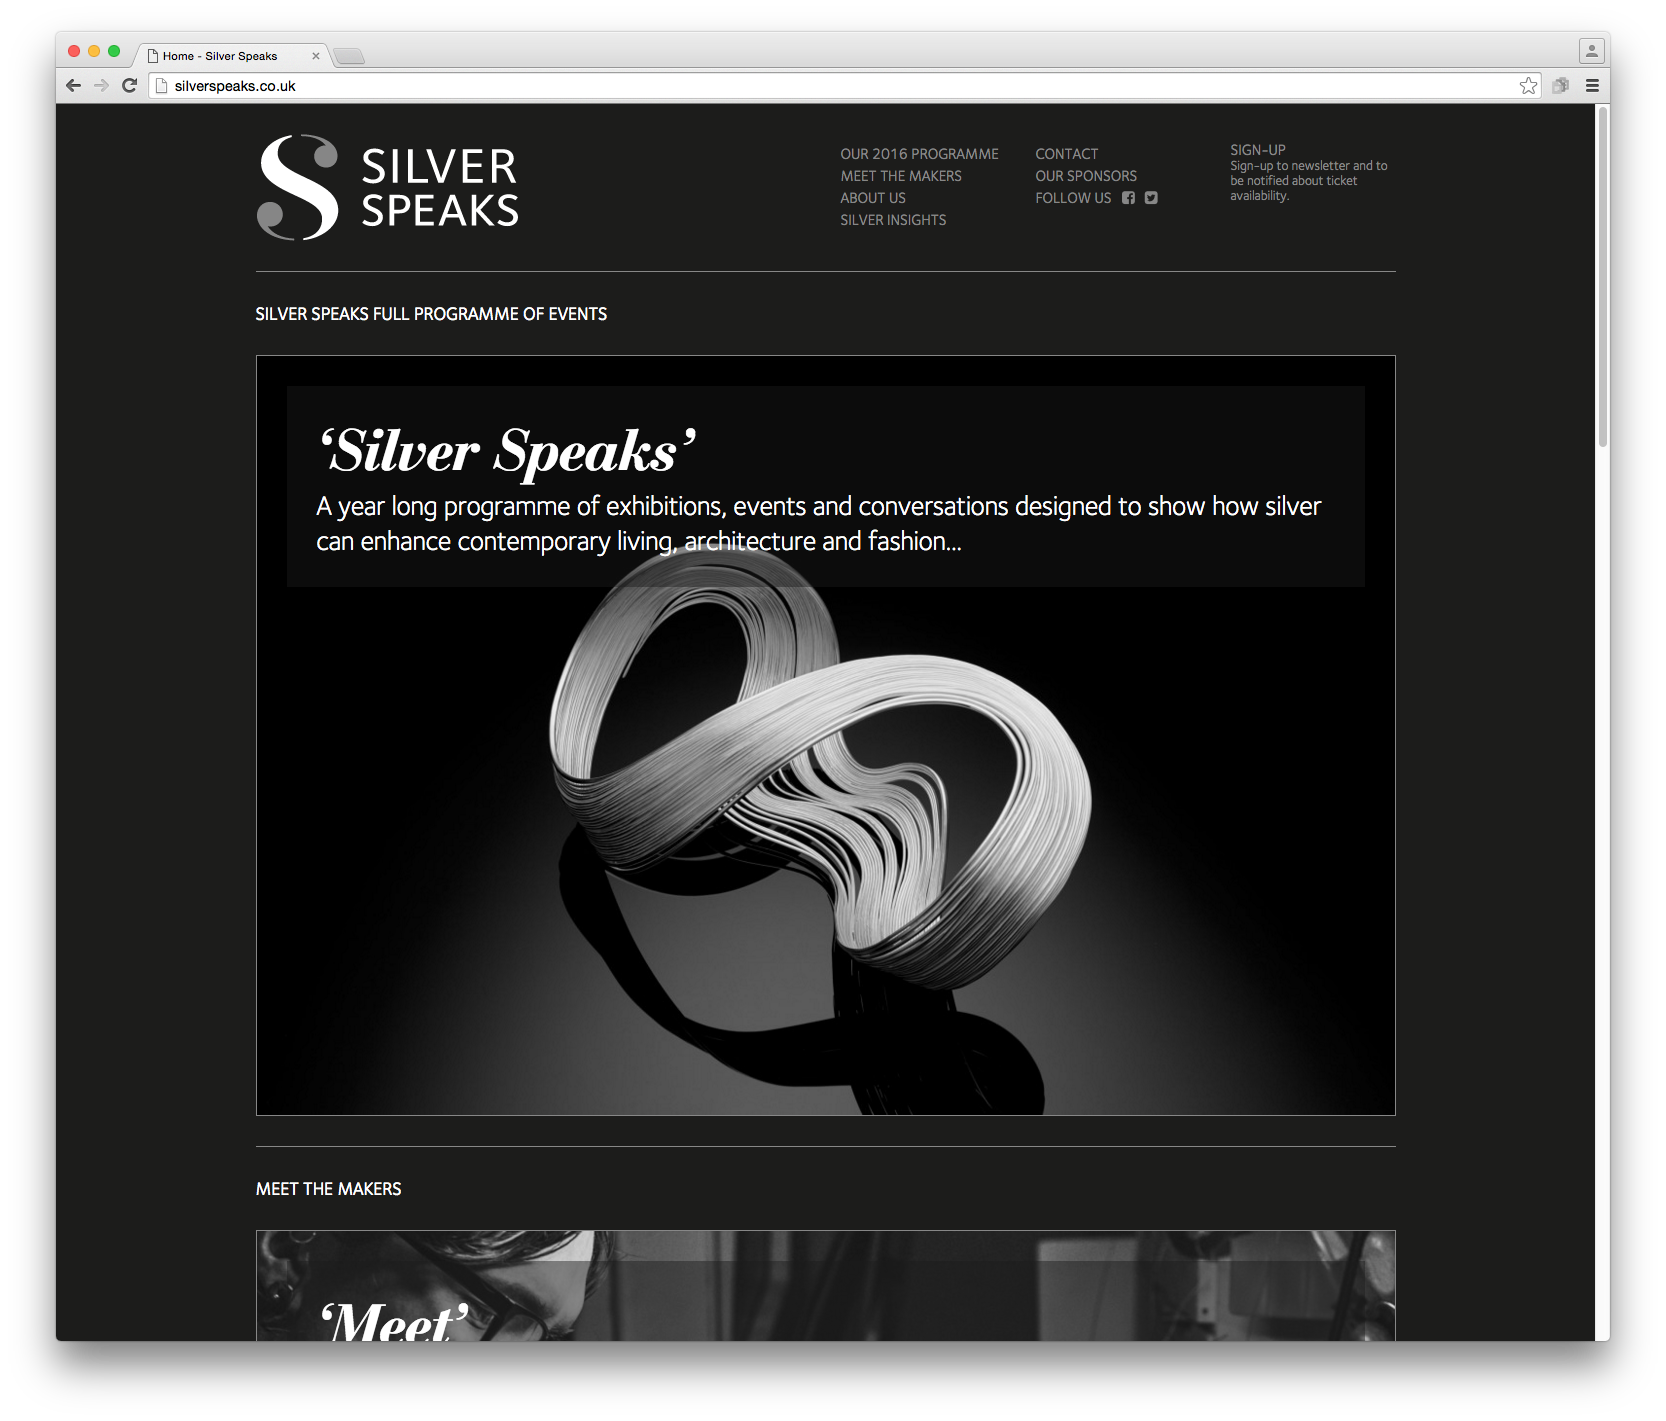 Branding and website design by Neon - designed by Dana Robertson - Silver Speaks exhibition - website homepage detail